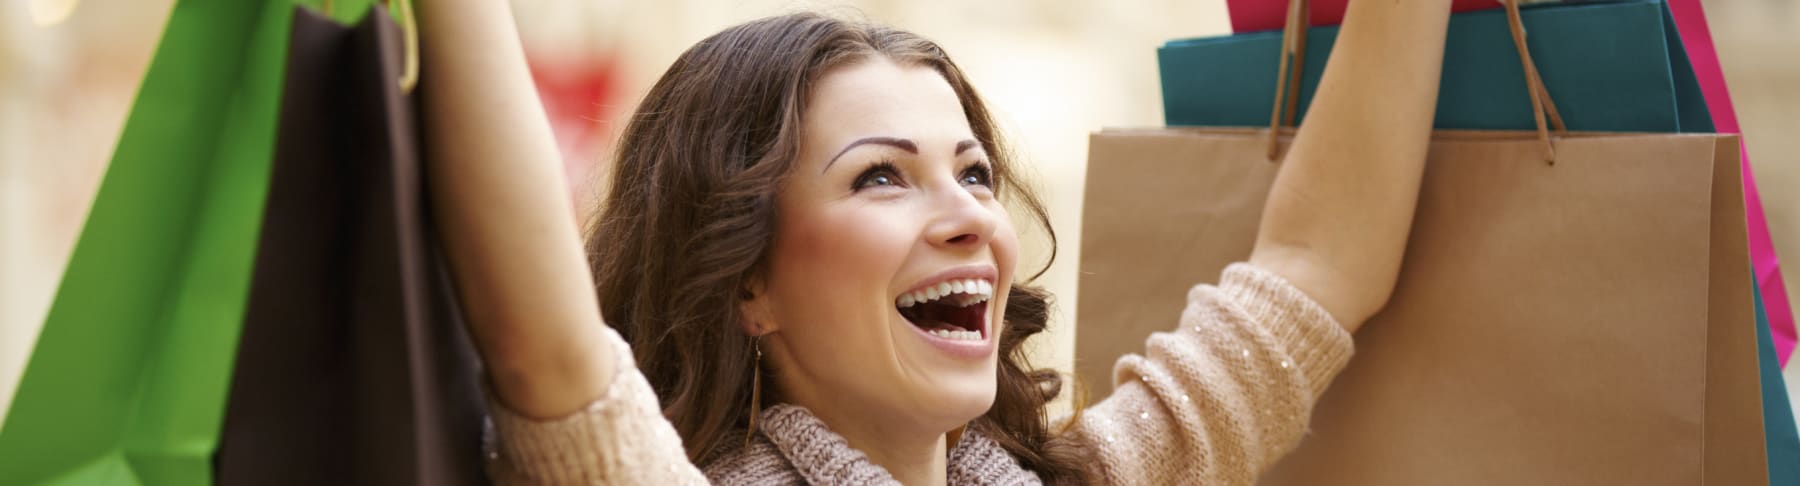 Happy woman holds shopping bag in air.